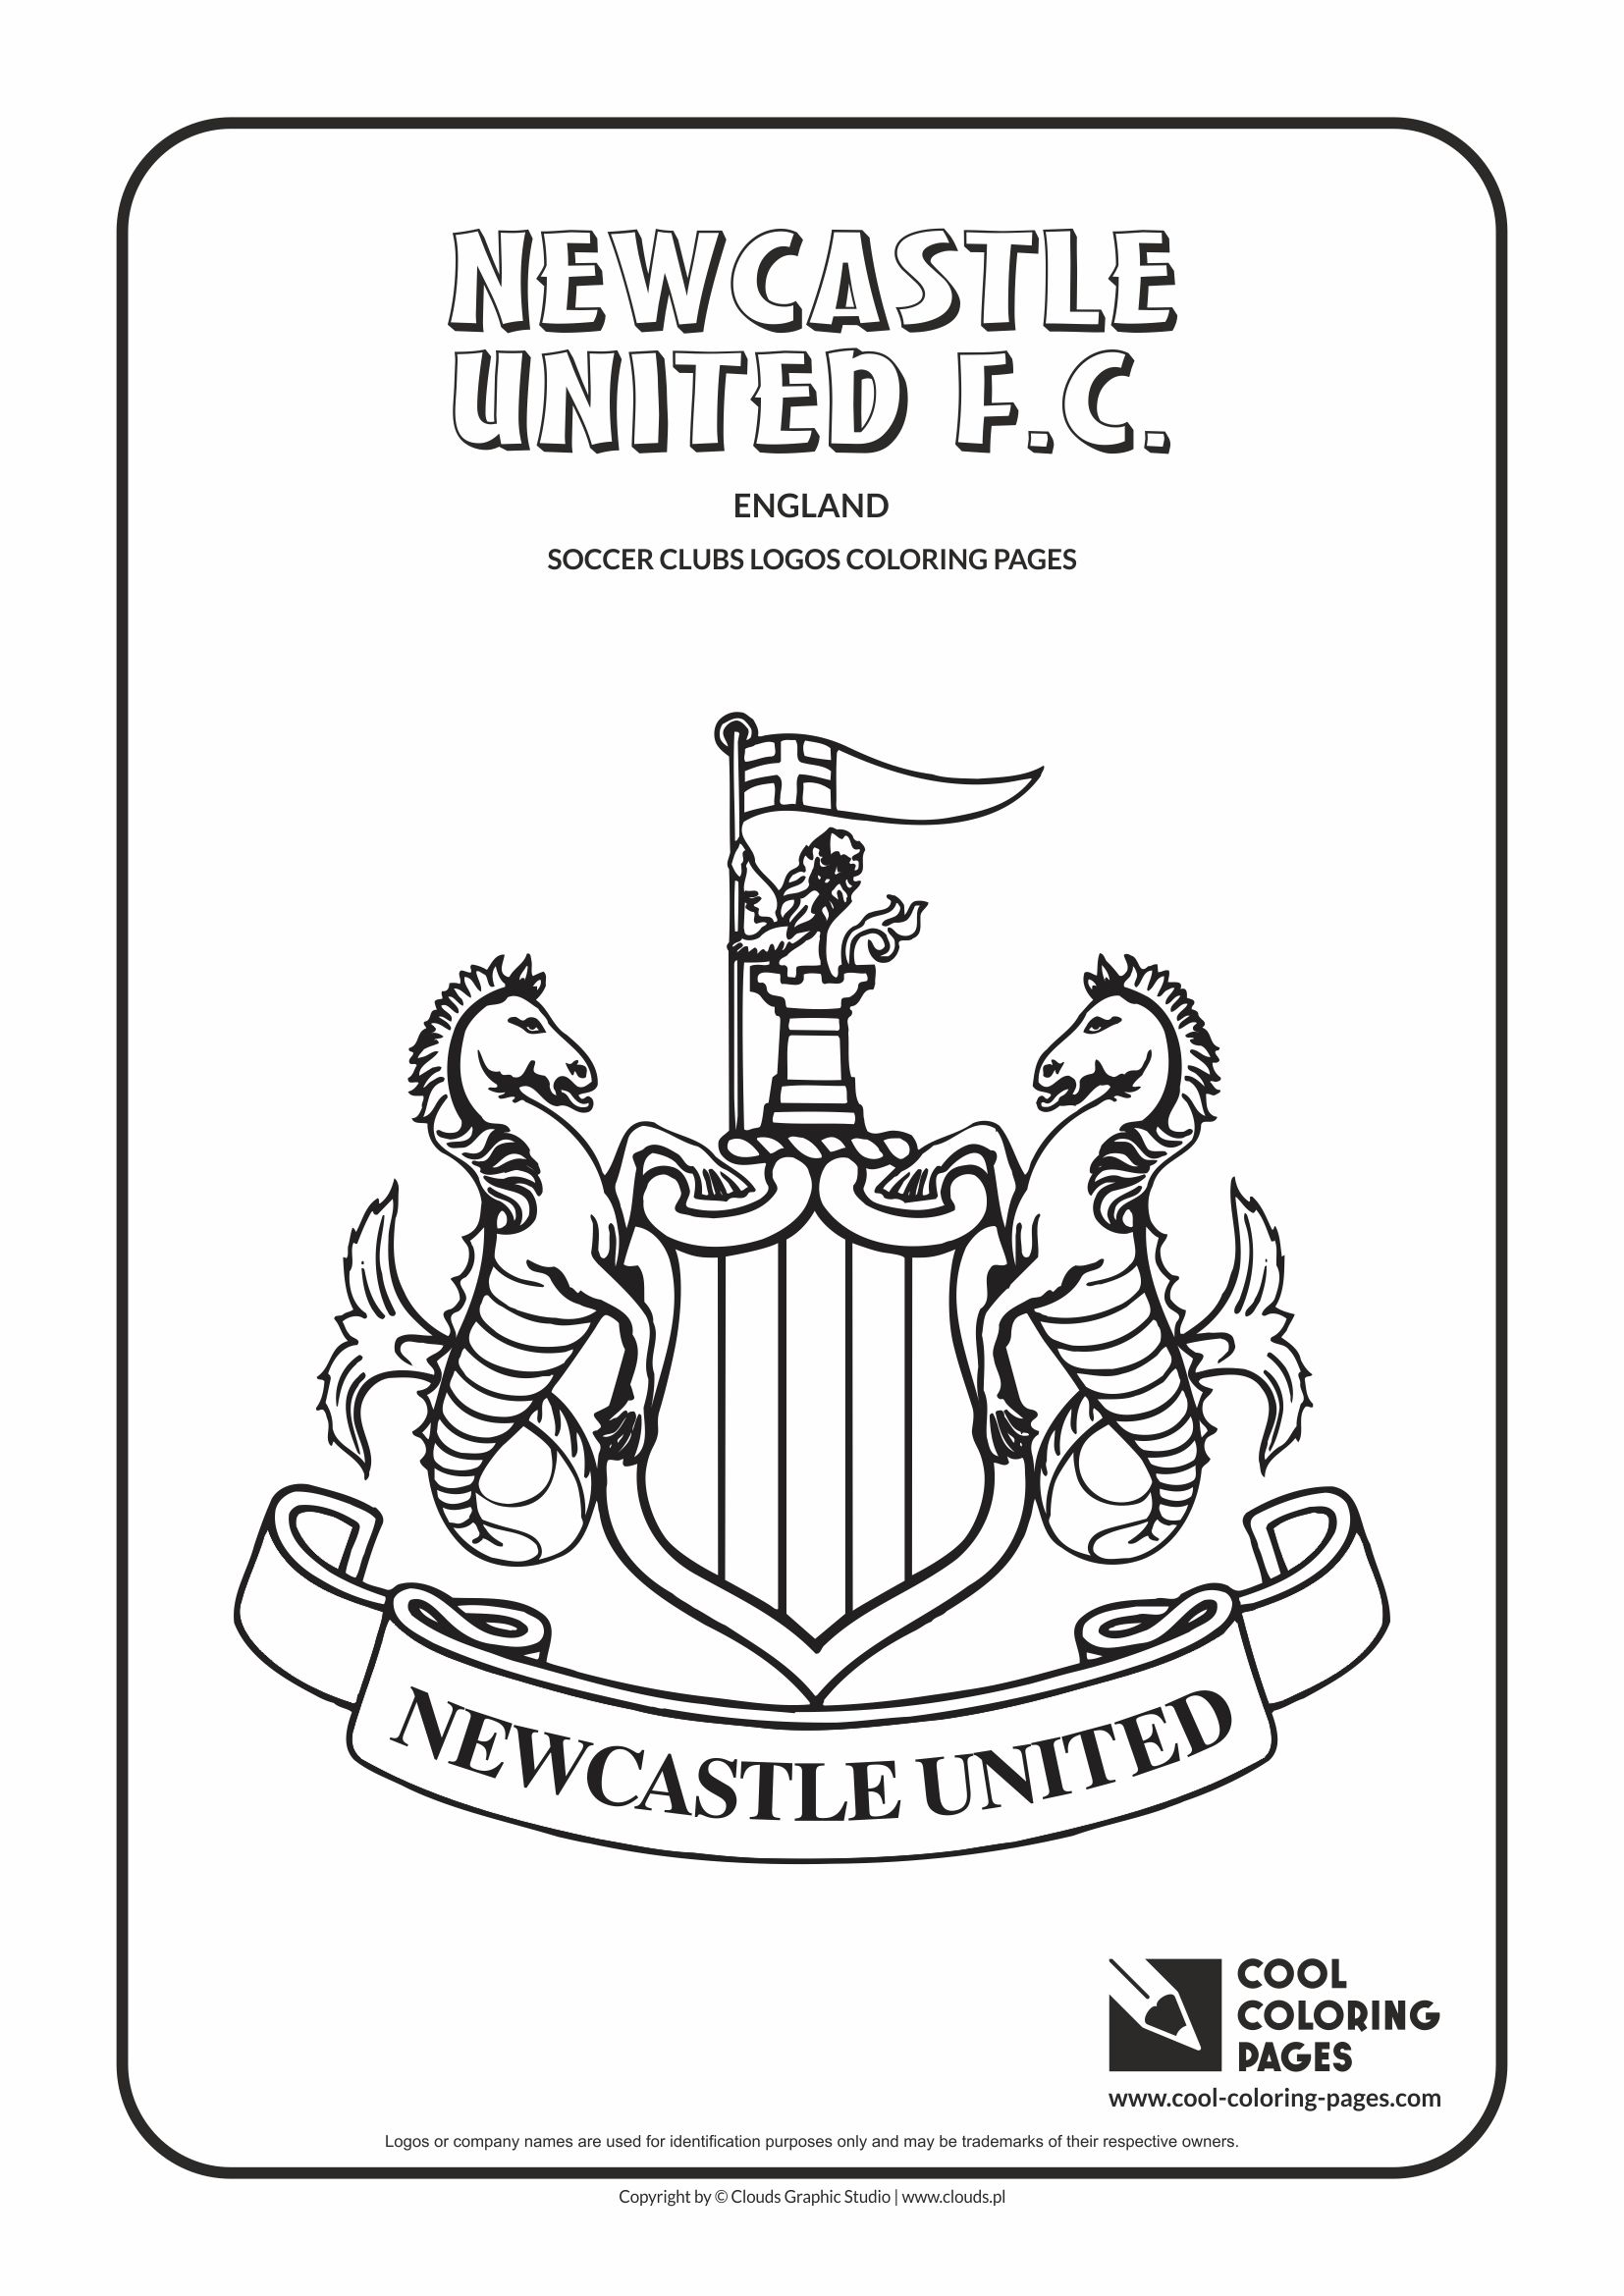 Newcastle United F.C. logo coloring / Coloring page with Newcastle United F.C. logo / Newcastle United F.C. logo colouring page.